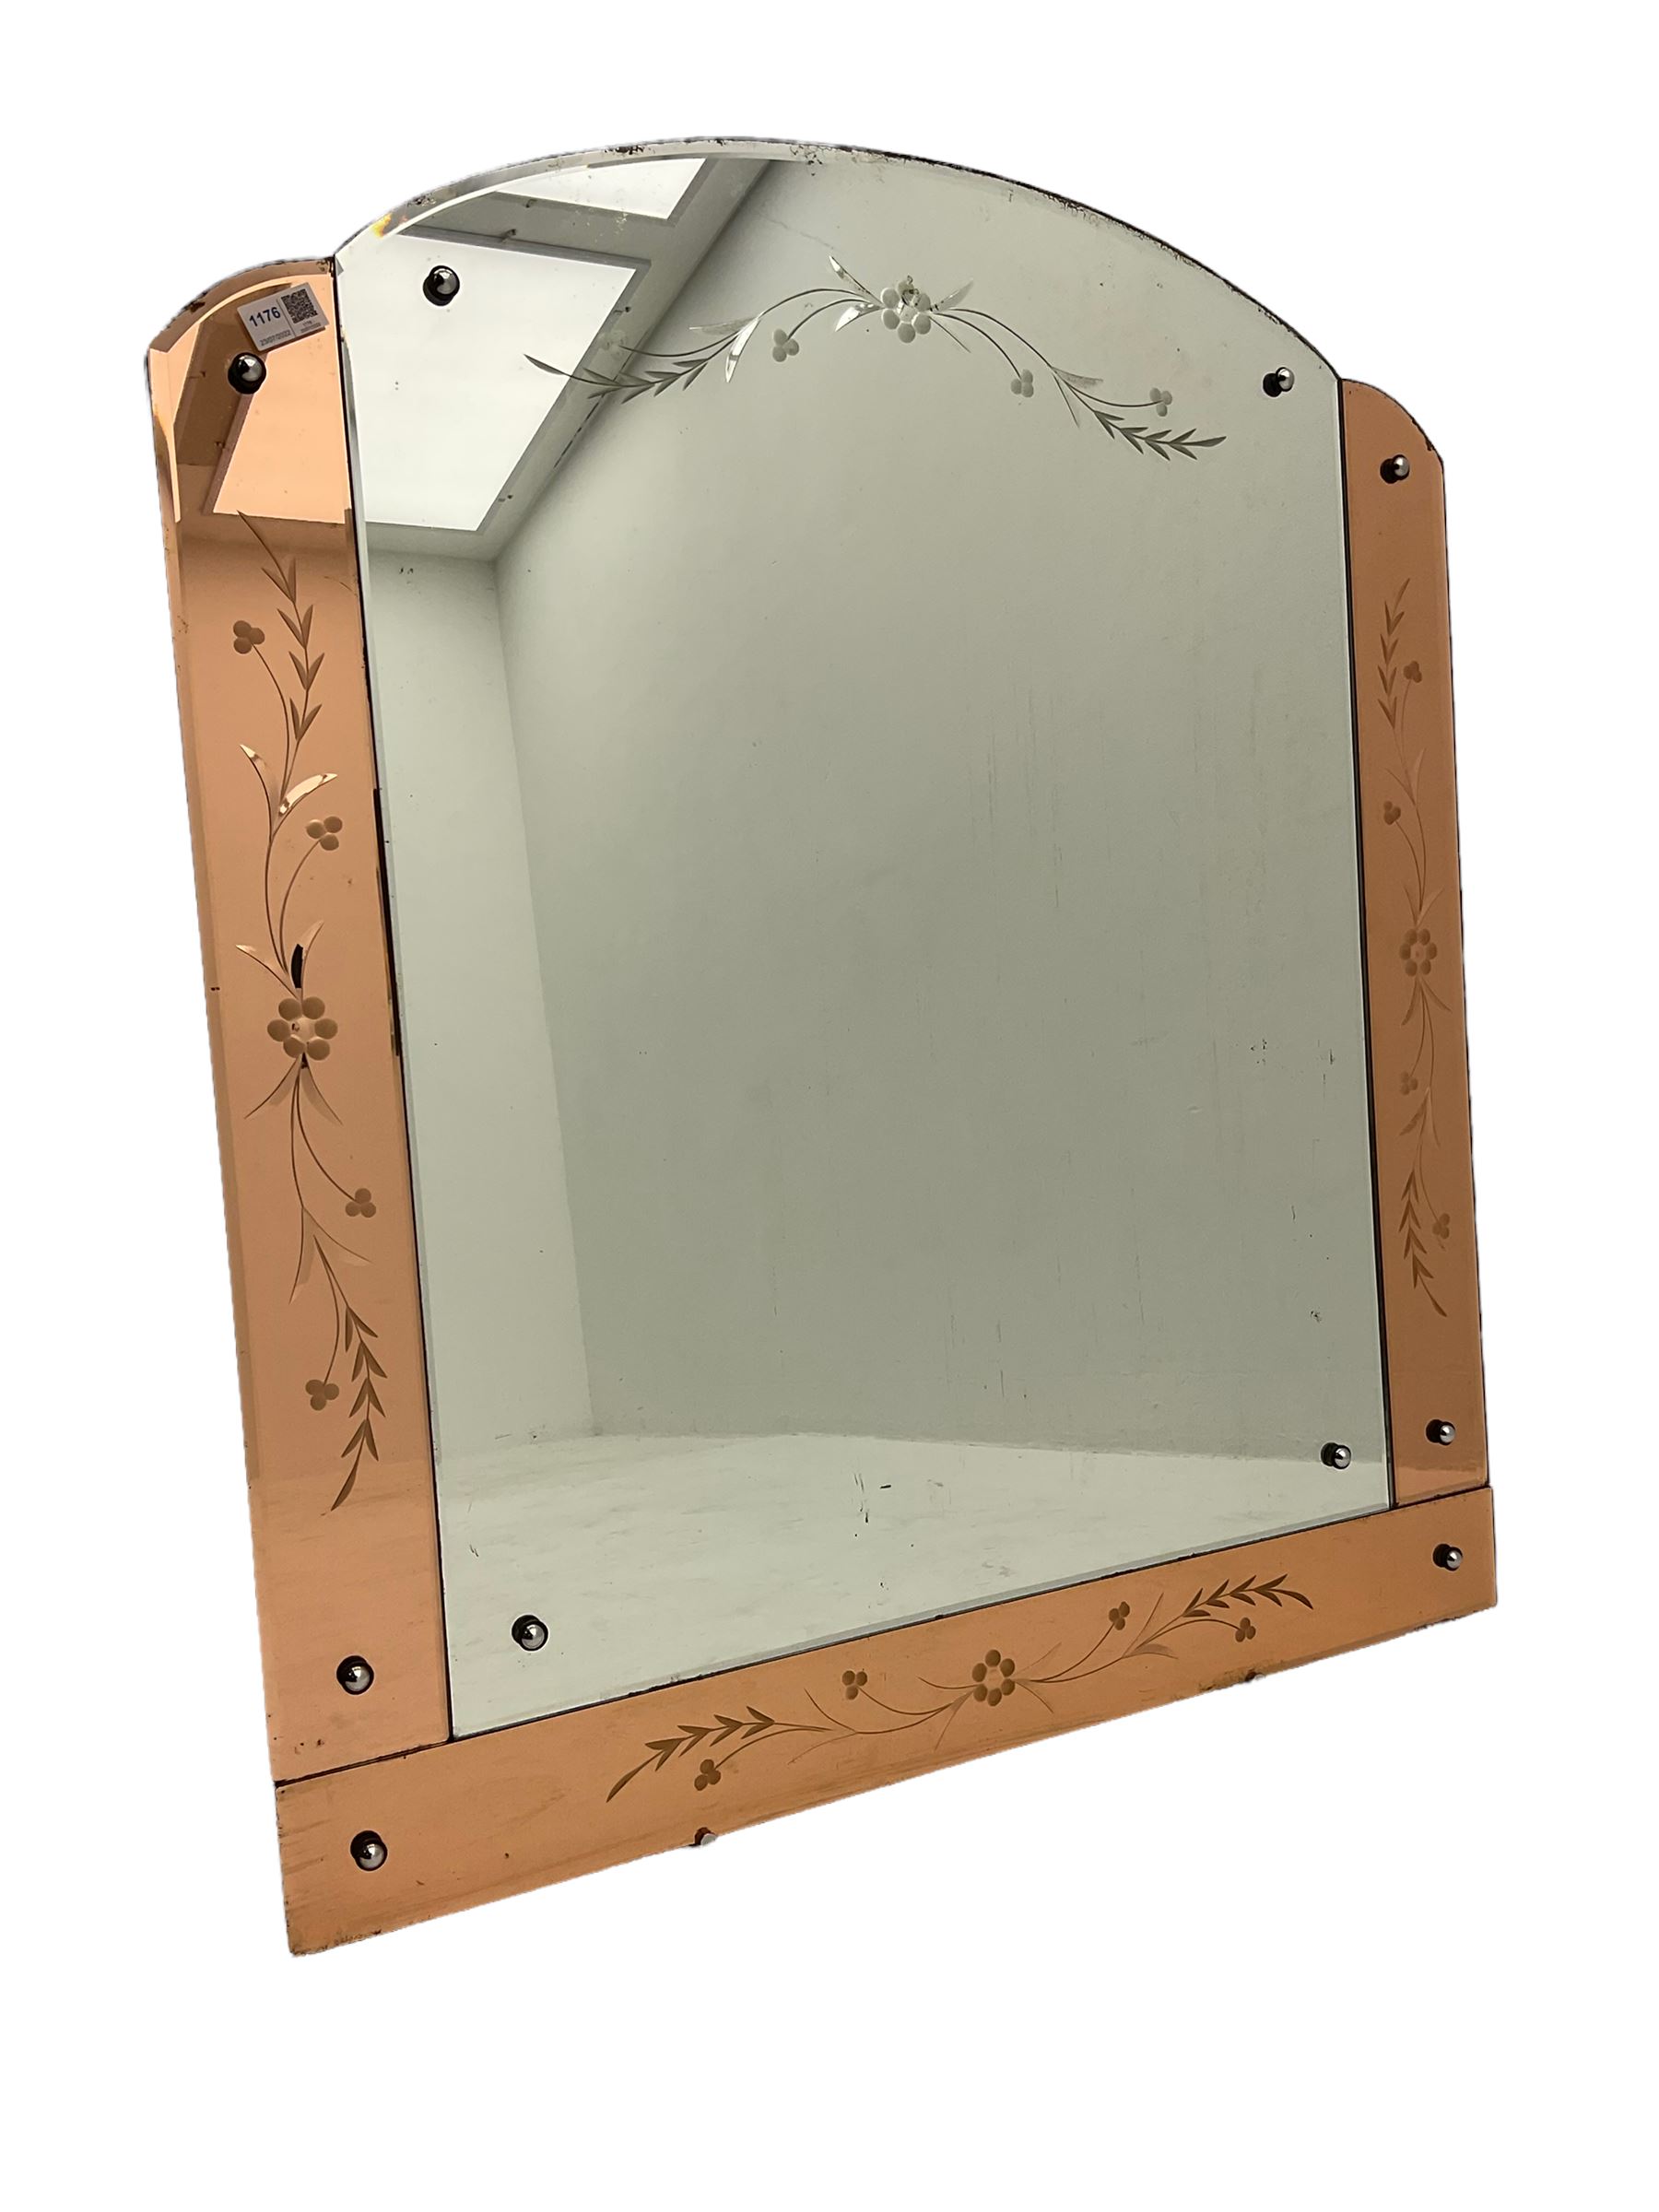 Art Deco style frameless wall mirror - Image 2 of 3